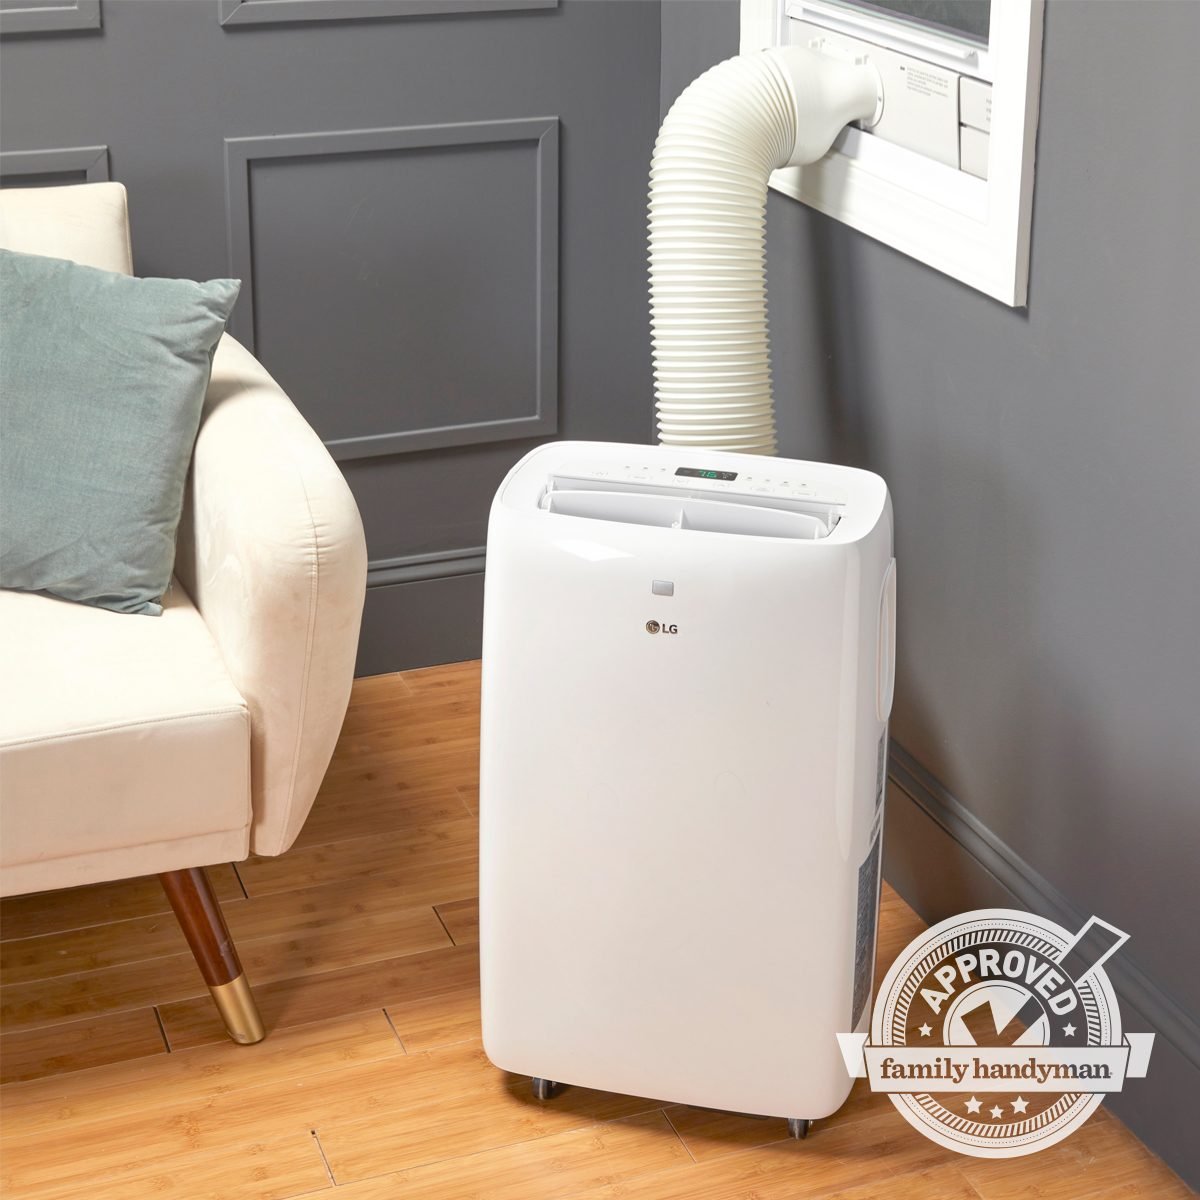 oase skuespillerinde udbrud Portable LG Air Conditioner Review: Stay Cool With This Floor A/C Unit